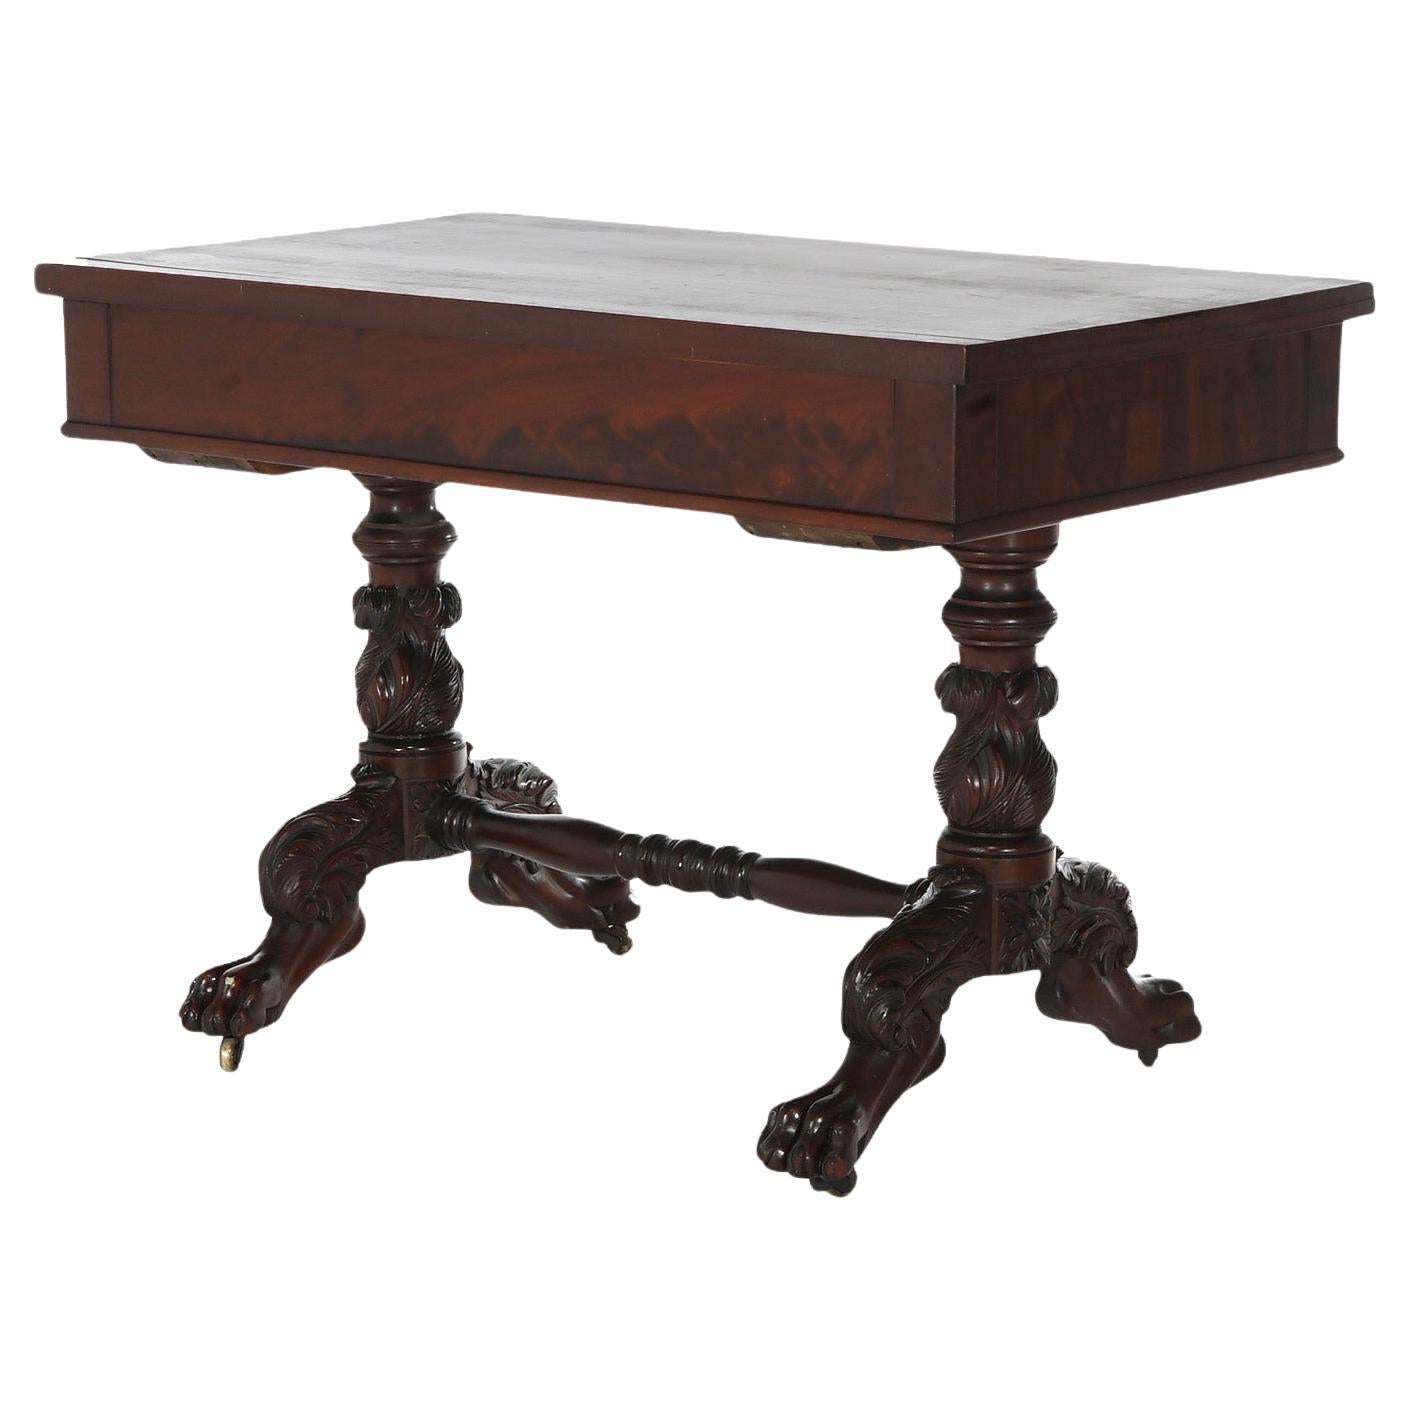 Antique American Empire Flame Mahogany Sofa Table, Carved Acanthus & Paws, C1840 For Sale